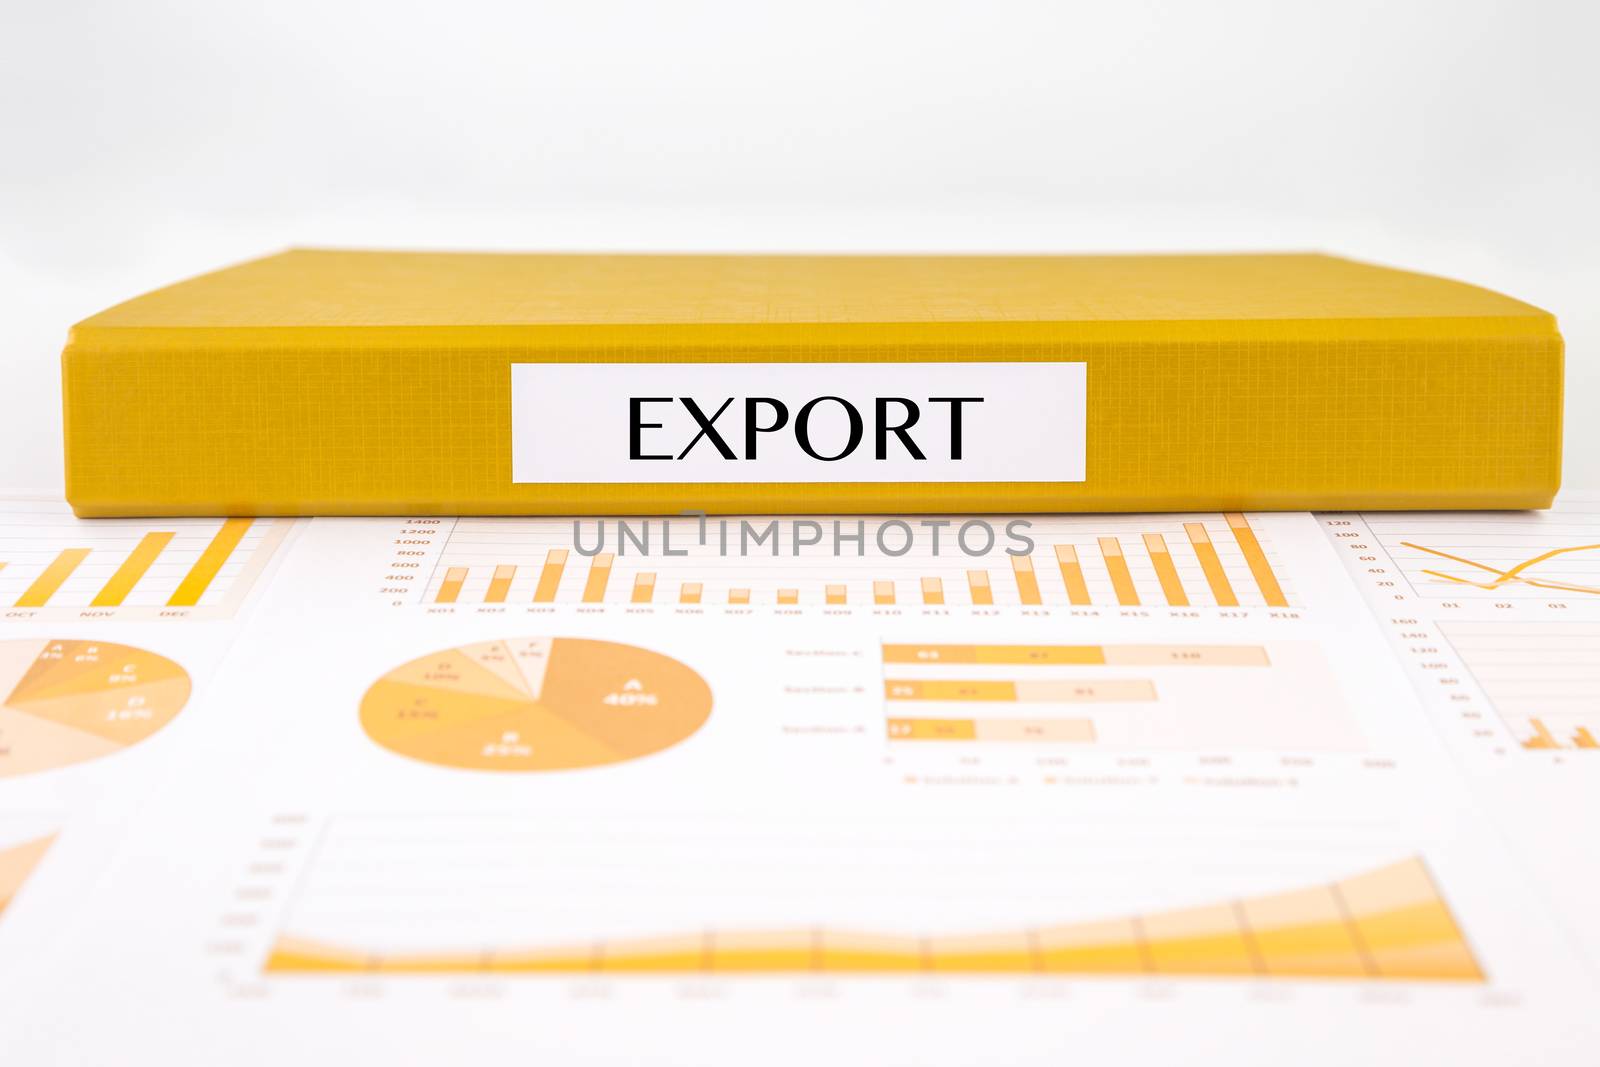 Export documents, graph analysis and sale report by vinnstock